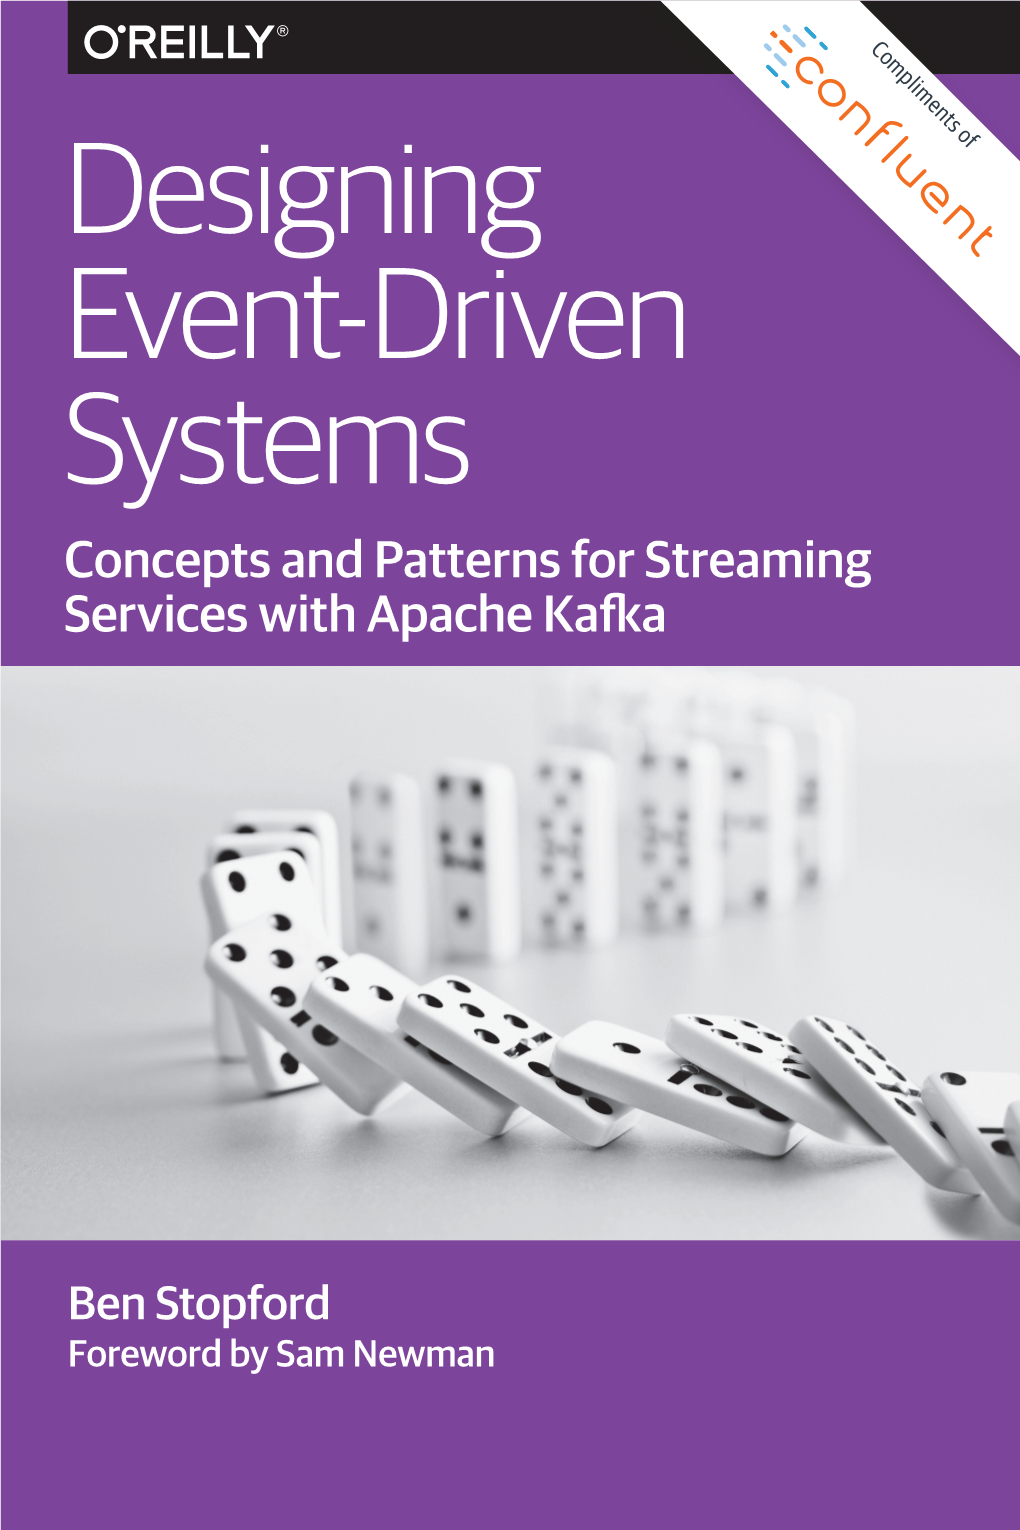 Designing Event-Driven Systems Concepts and Patterns for Streaming Services with Apache Kafka